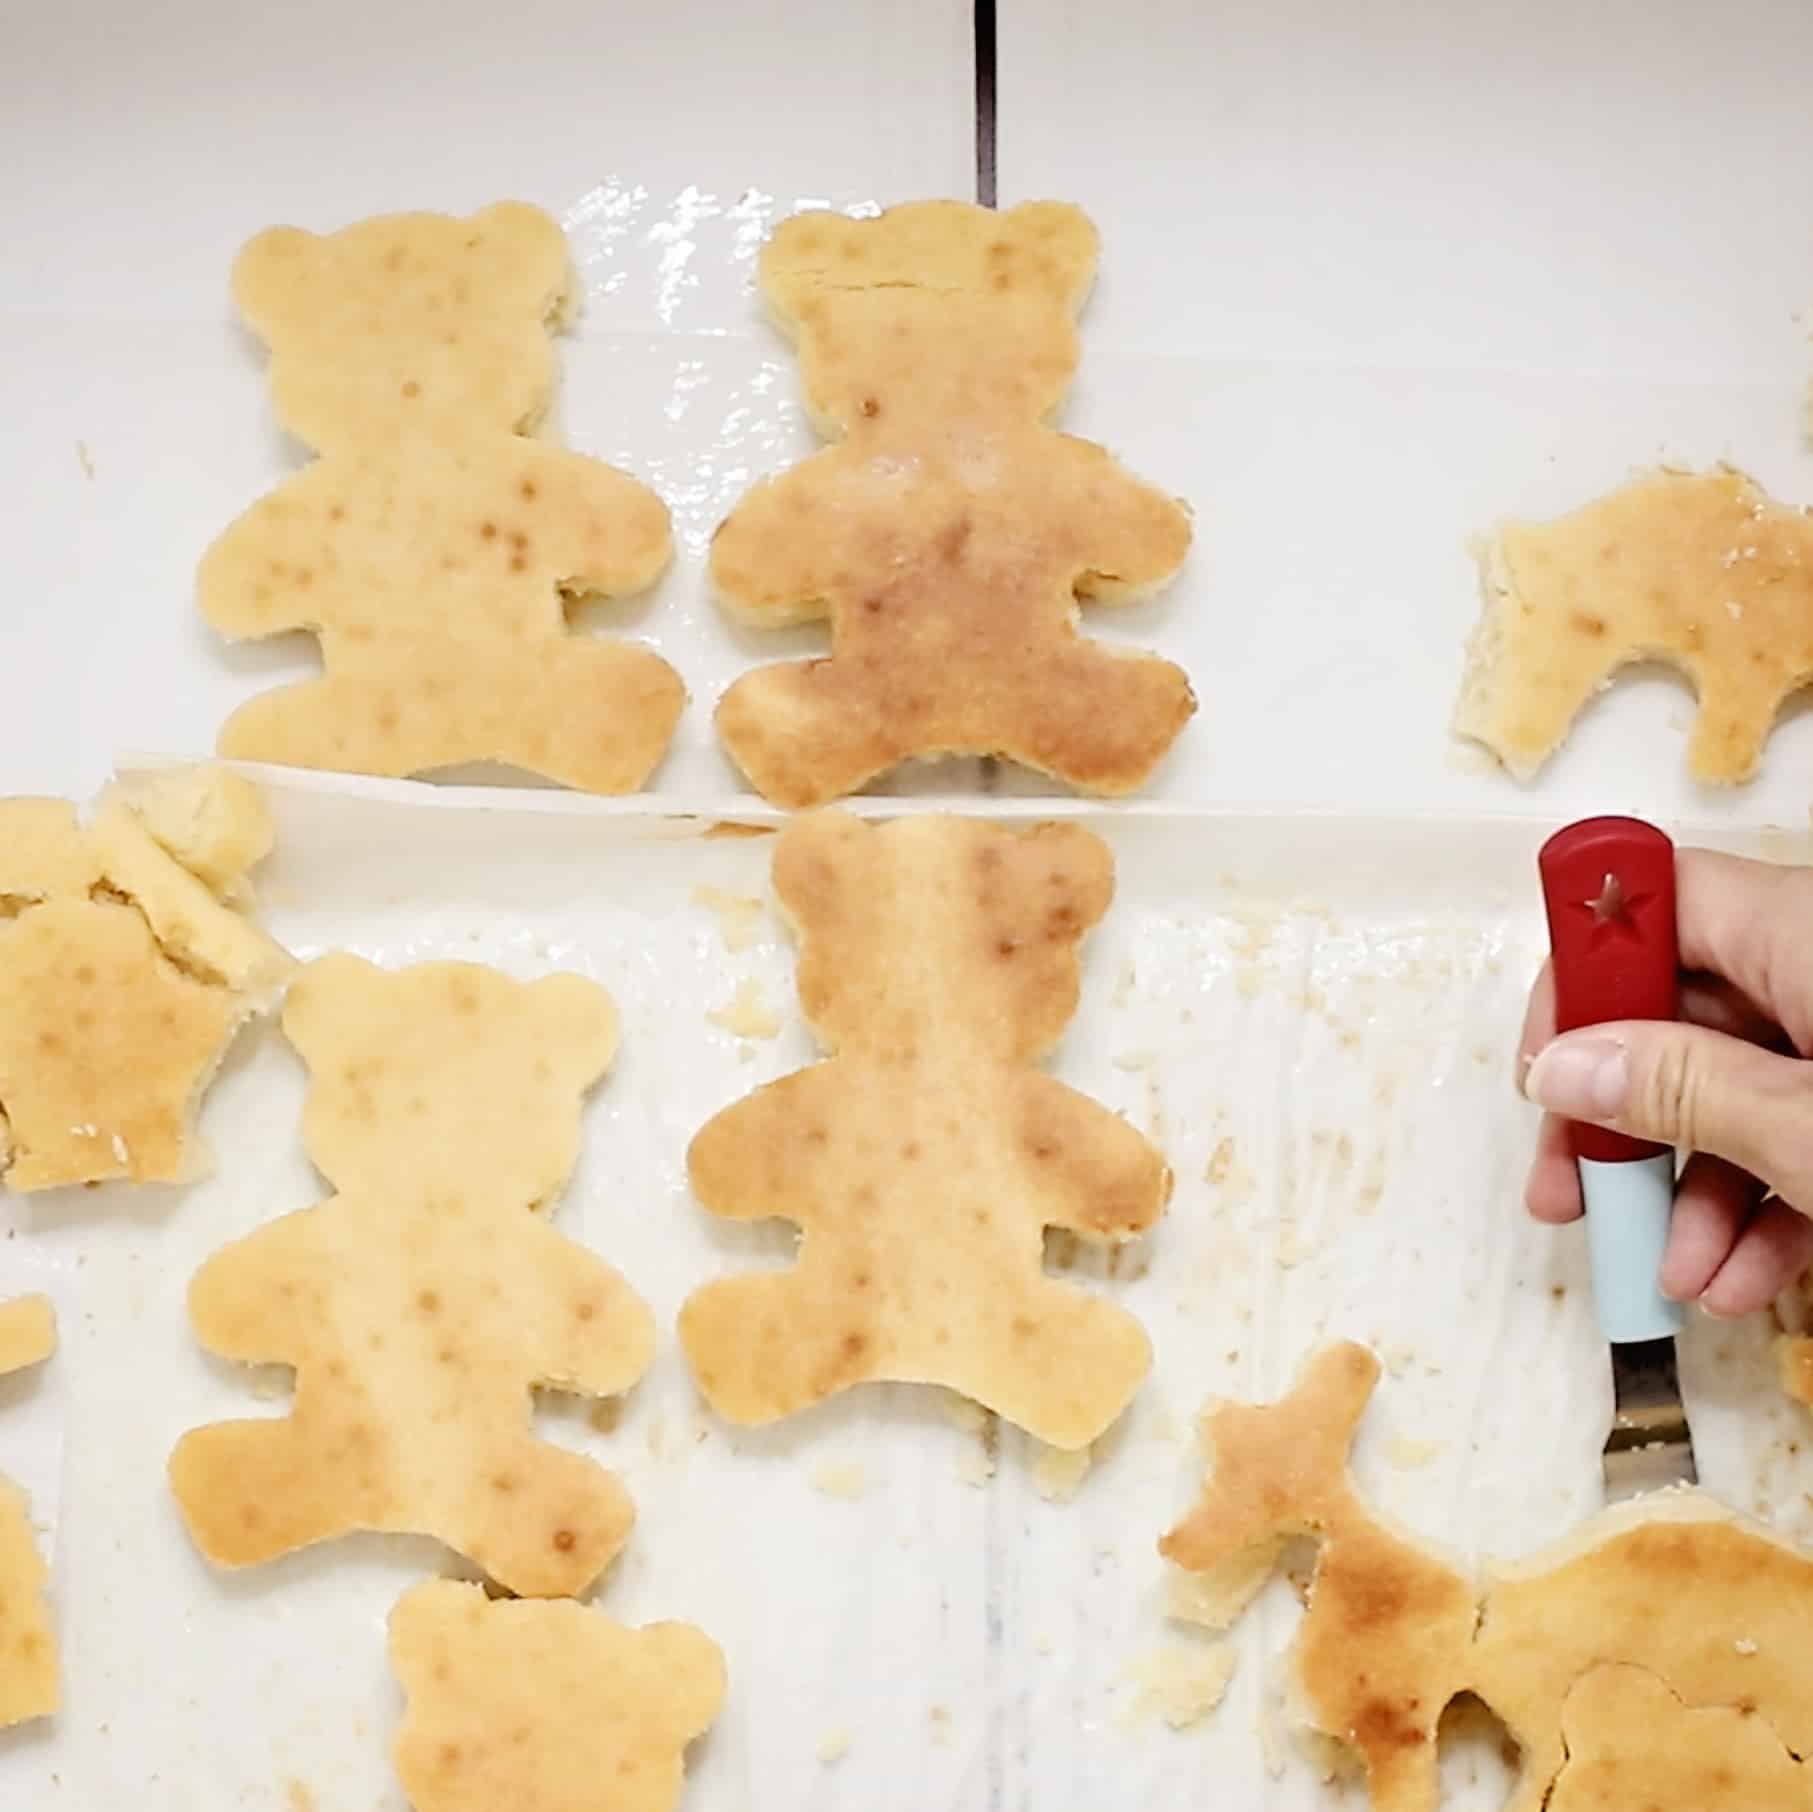 Make these yummy sheet pan bear heart pancakes for Valentine's Day breakfast to surprise the kids with a sweet treat